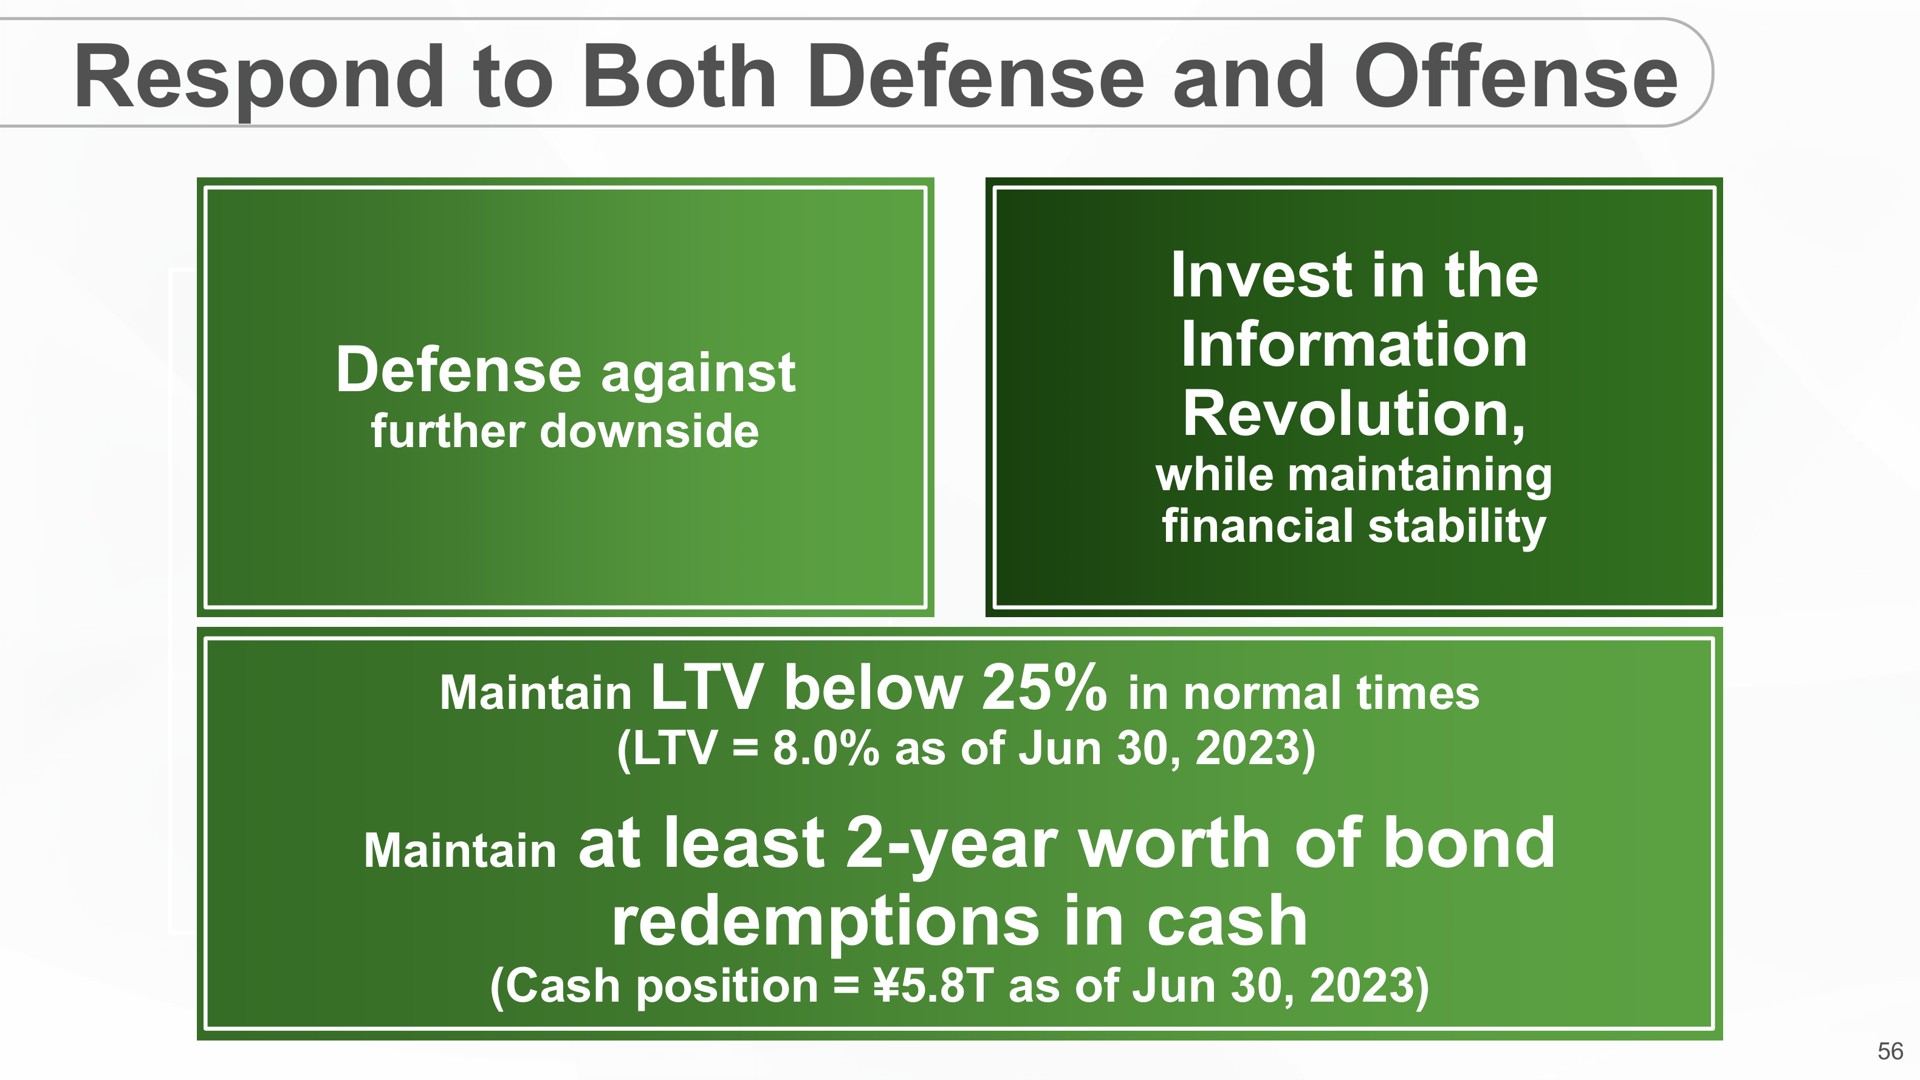 respond to both defense and offense invest in the information revolution maintain at least year worth of bond redemptions in cash further downside as | SoftBank